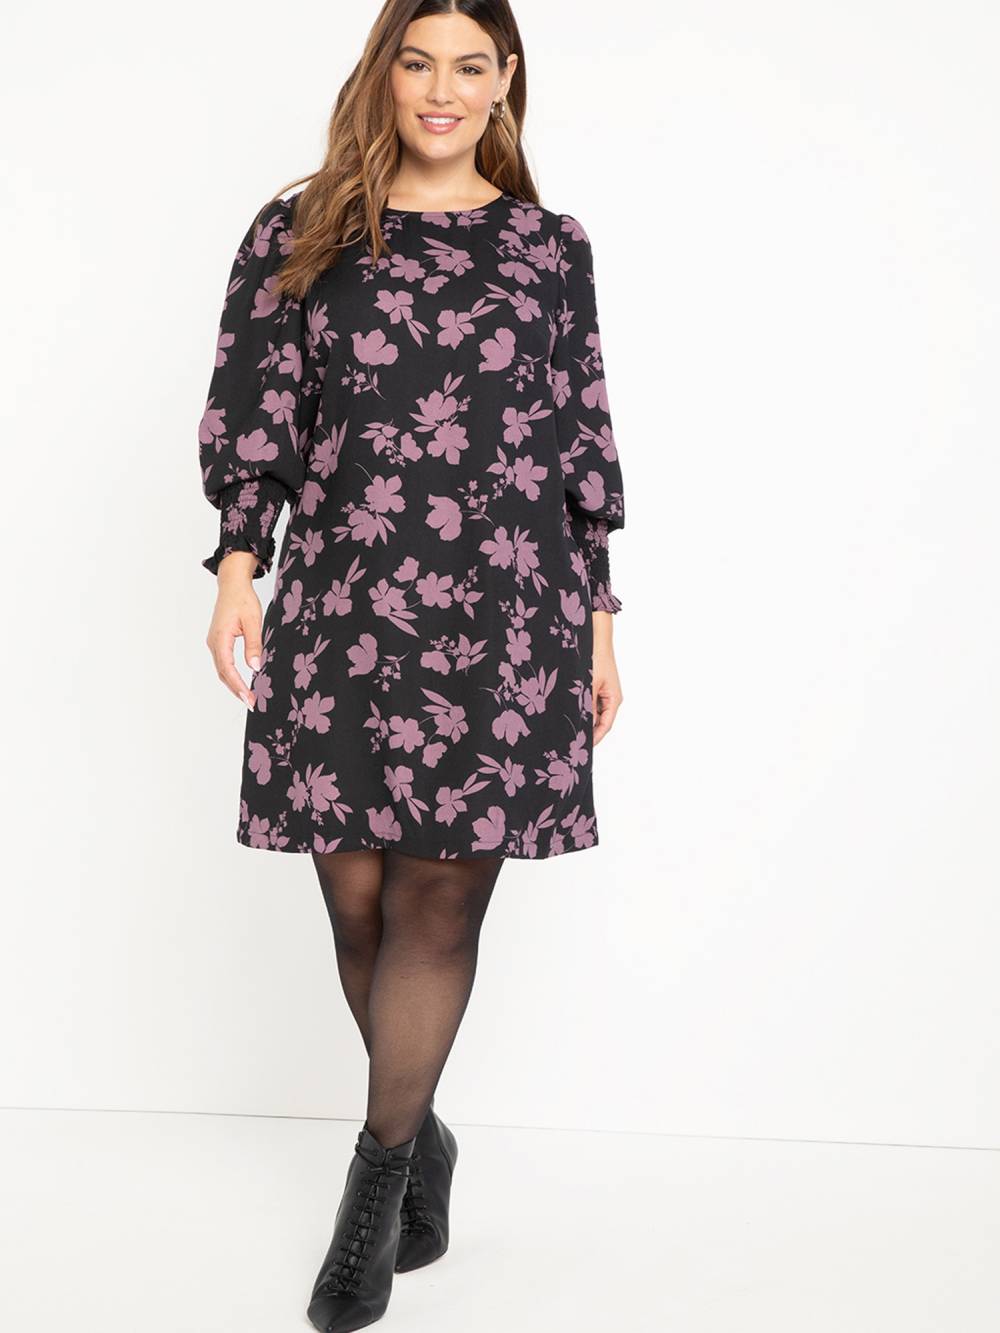 20 Best Affordable And Ethical Plus Size Clothing Brands | Panaprium